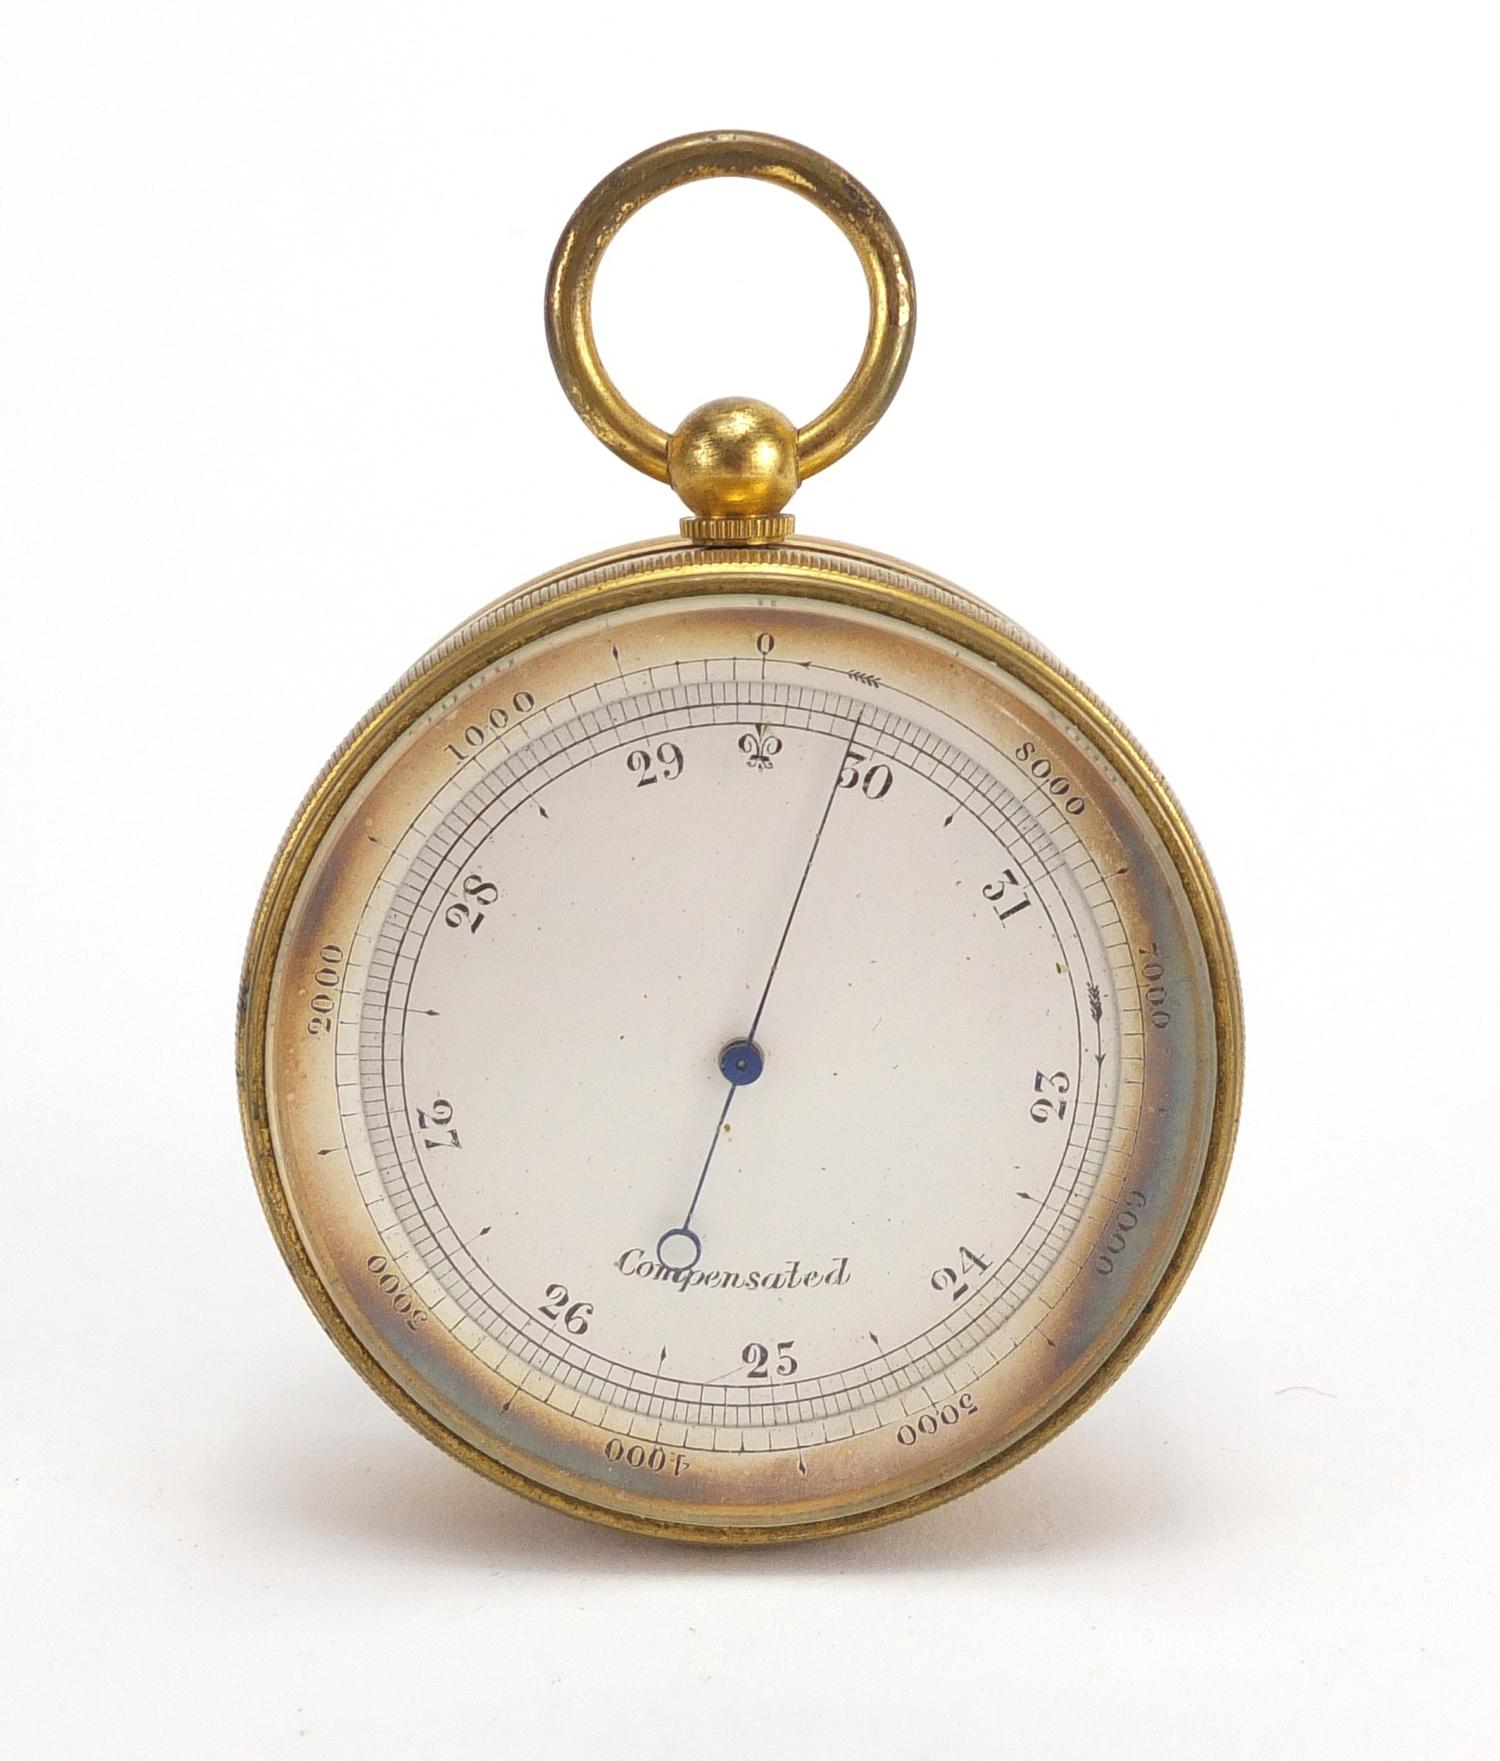 19th century gilt brass pocket weath station with compensated barometer, thermometer and compass, - Image 2 of 8